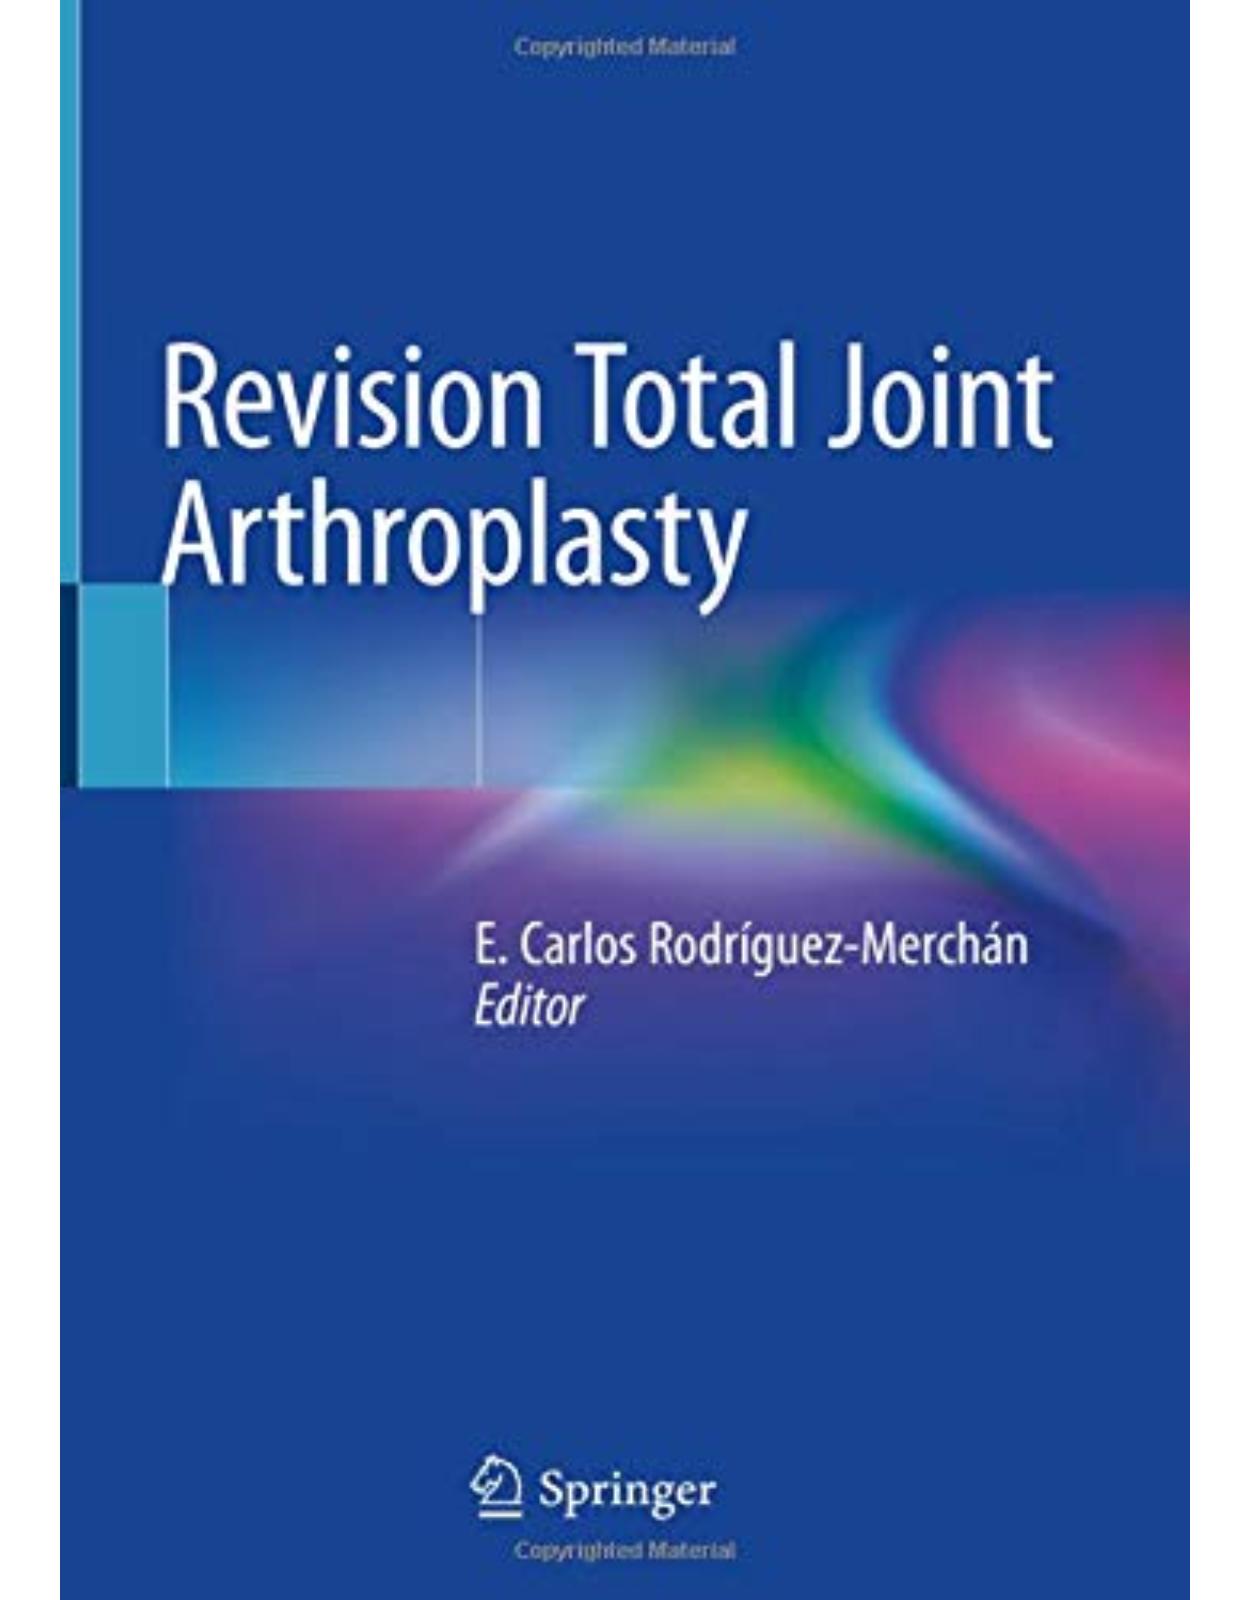 Revision Total Joint Arthroplasty